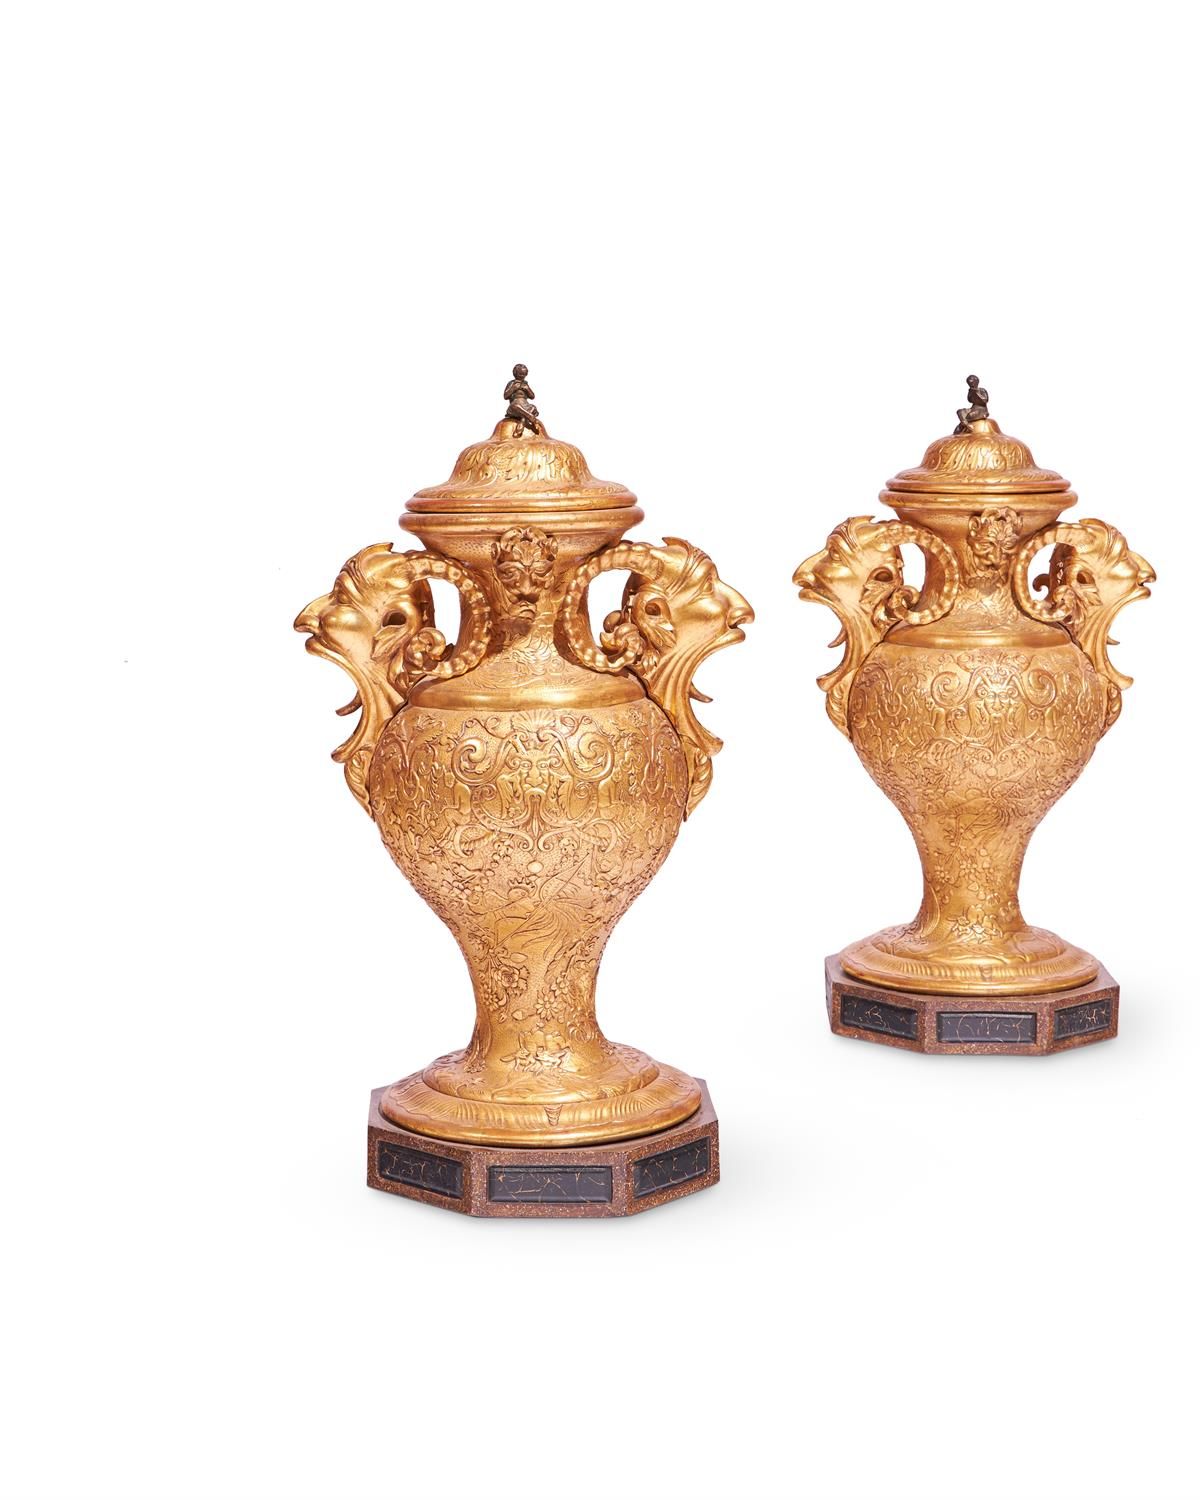 A PAIR OF ITALIAN NEOCLASSICAL GILTWOOD VASES, FLORENCE, SECOND HALF 19TH CENTUR&hellip;